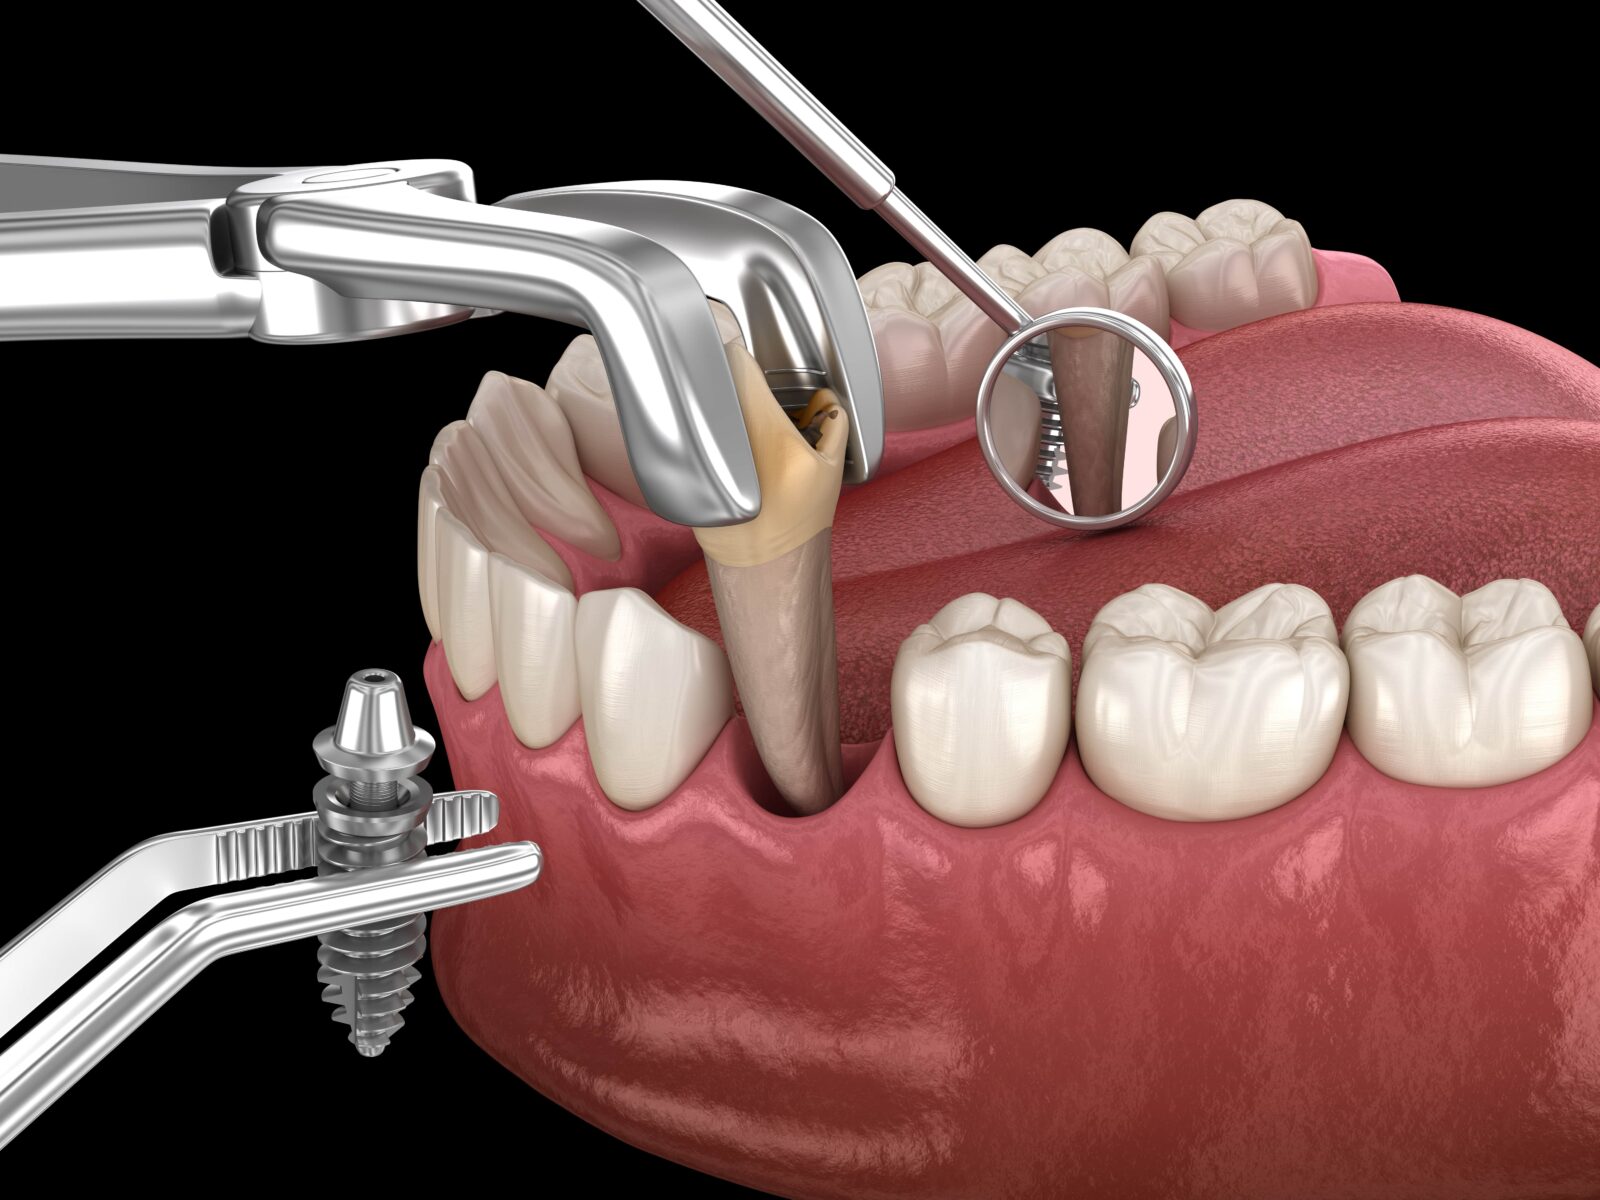 tooth extraction with dental implant being placed